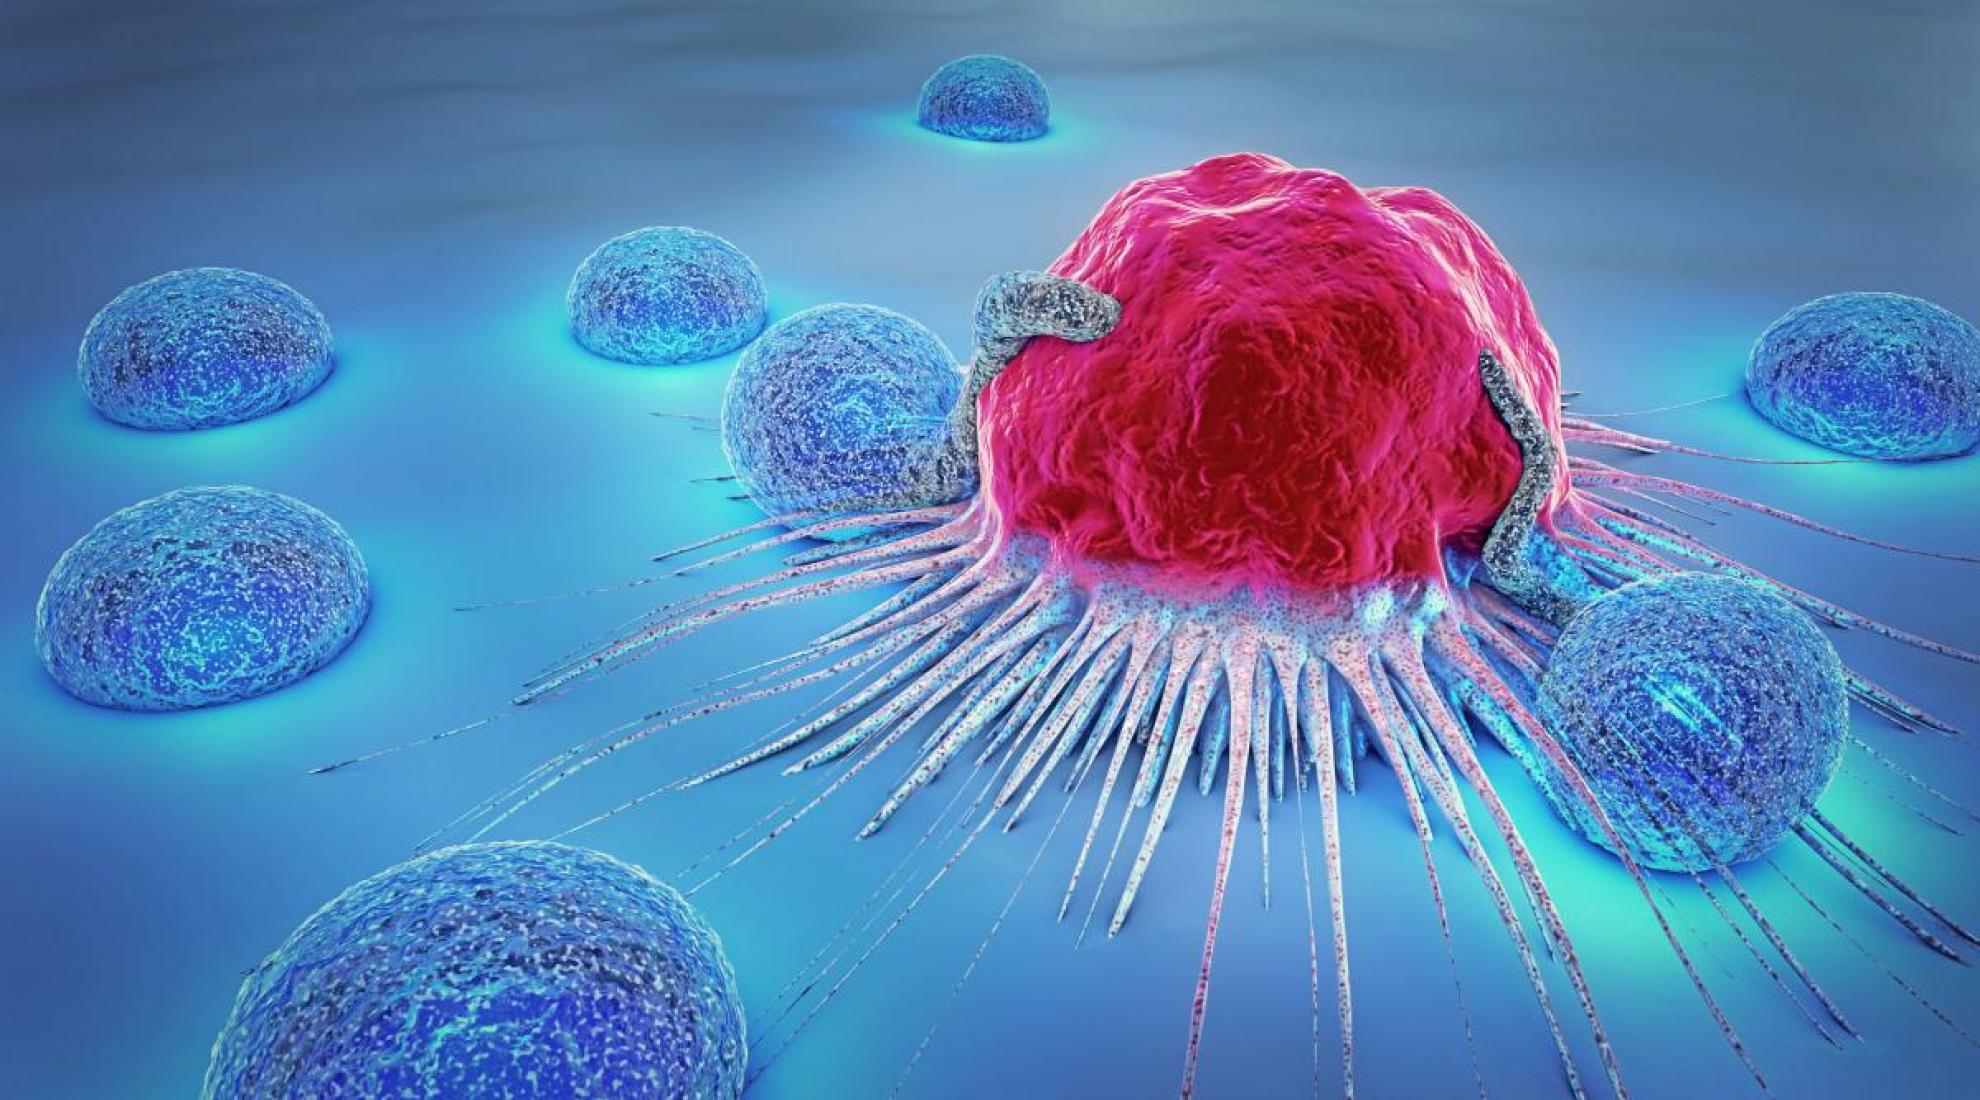 New cancer therapies